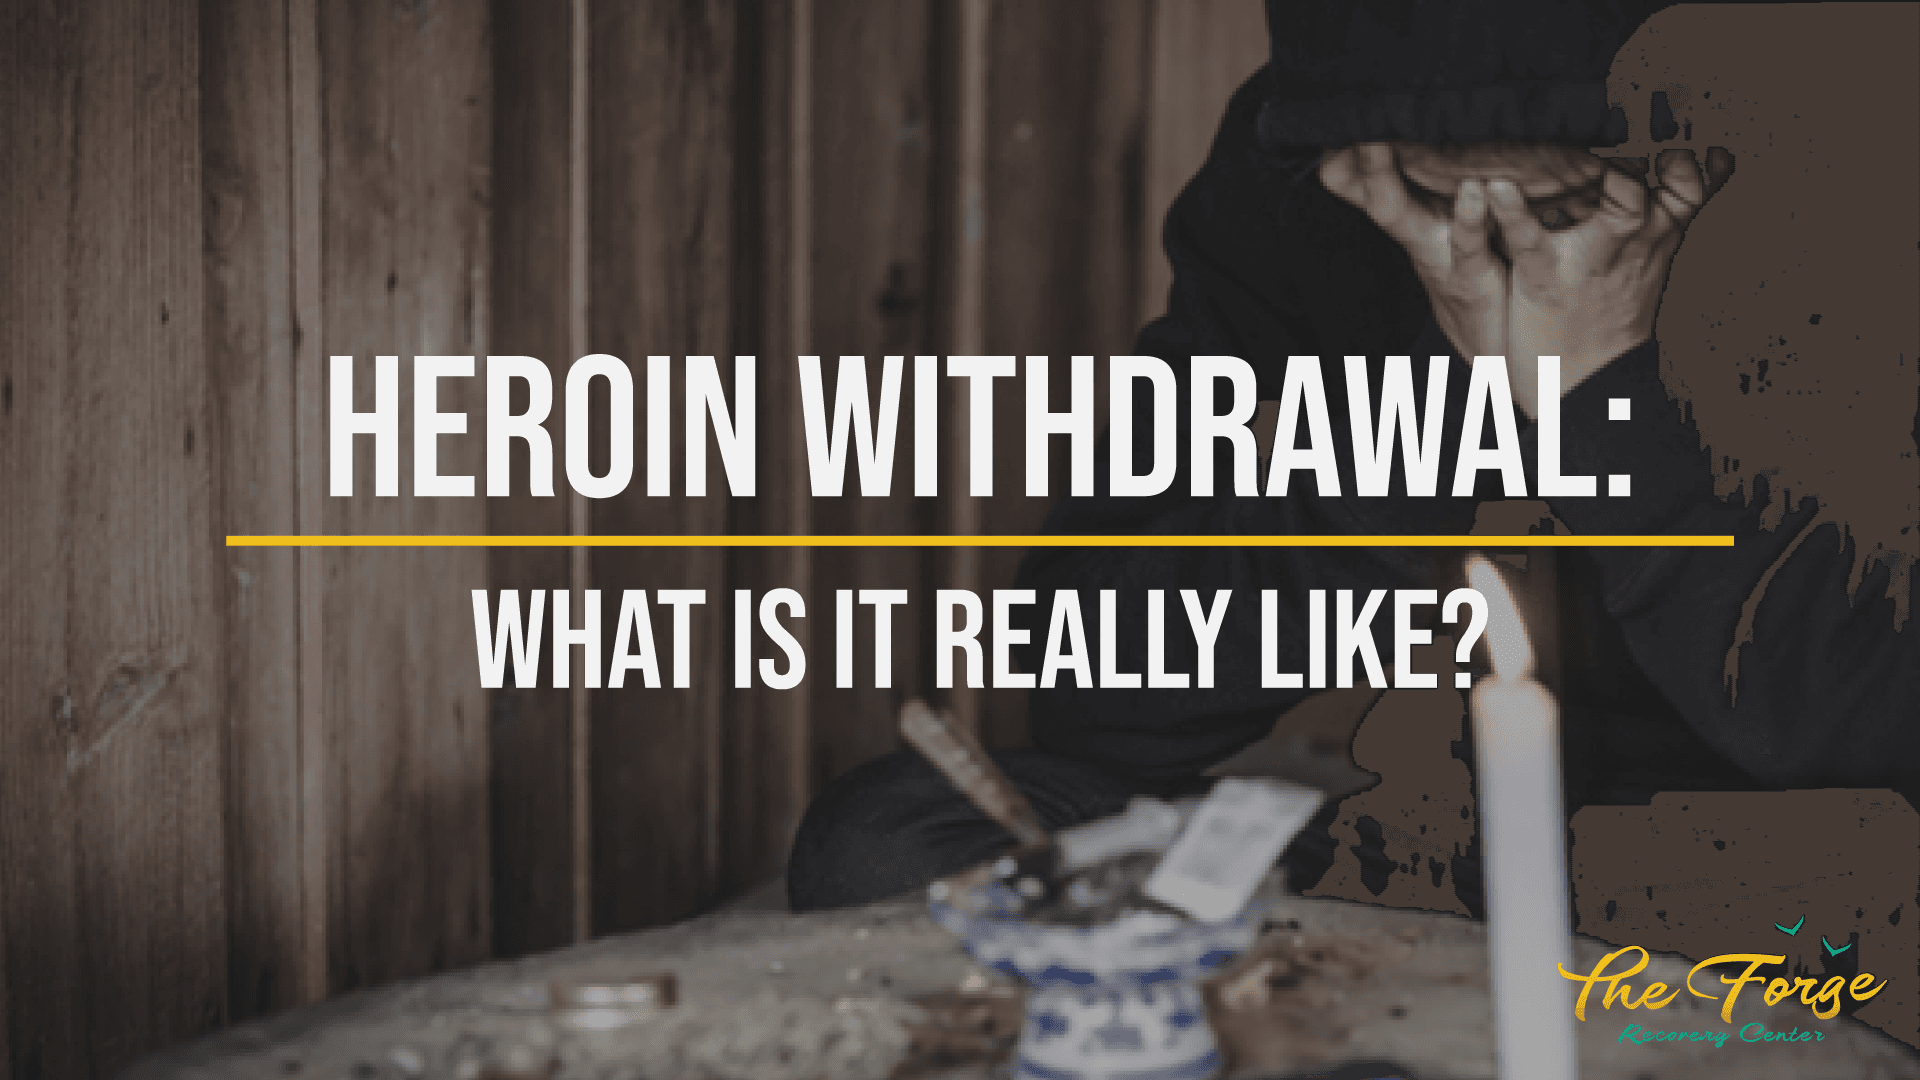 What is Heroin Withdrawal?